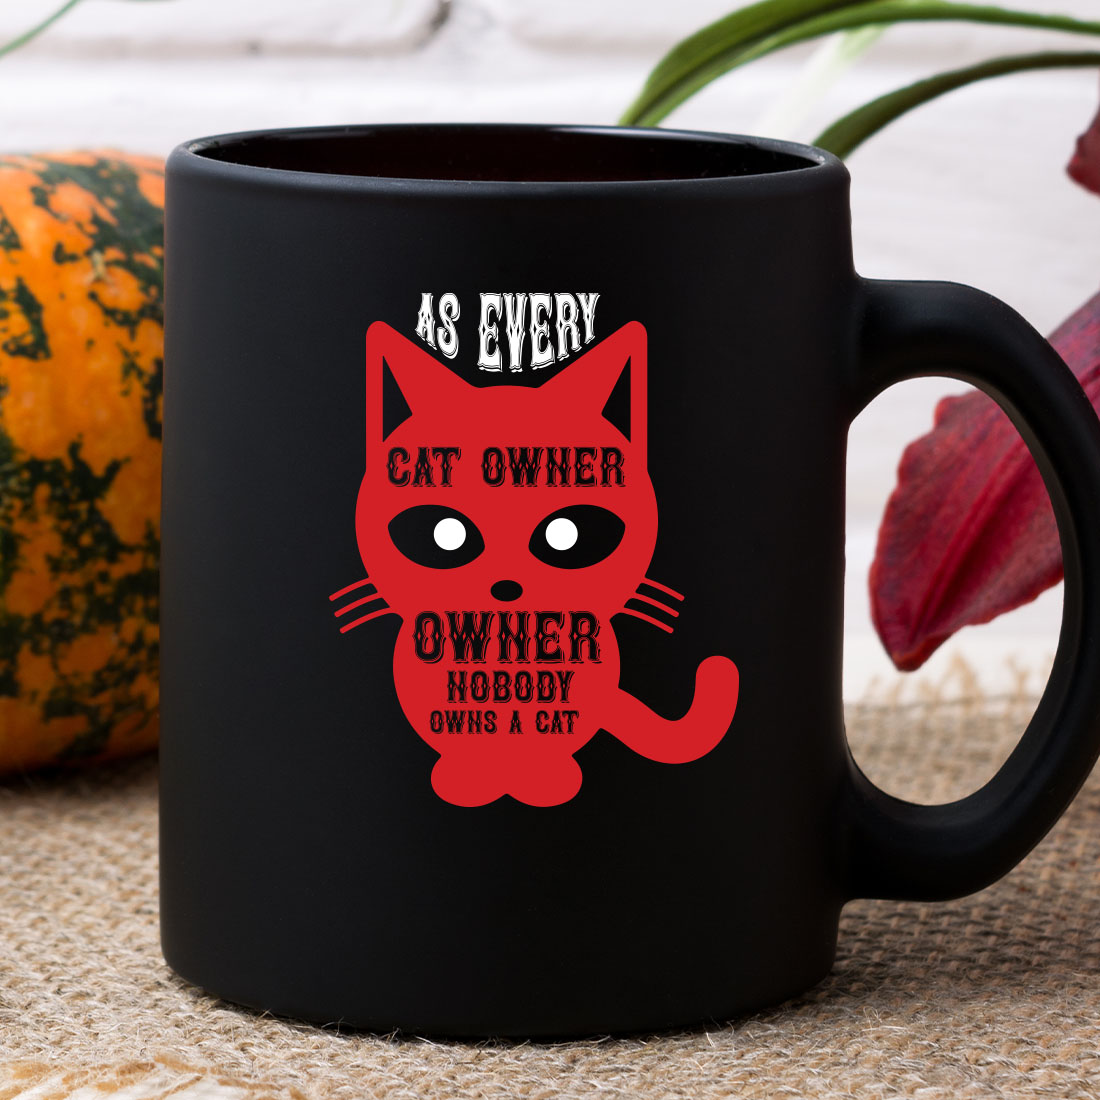 Black coffee mug with a red cat on it.